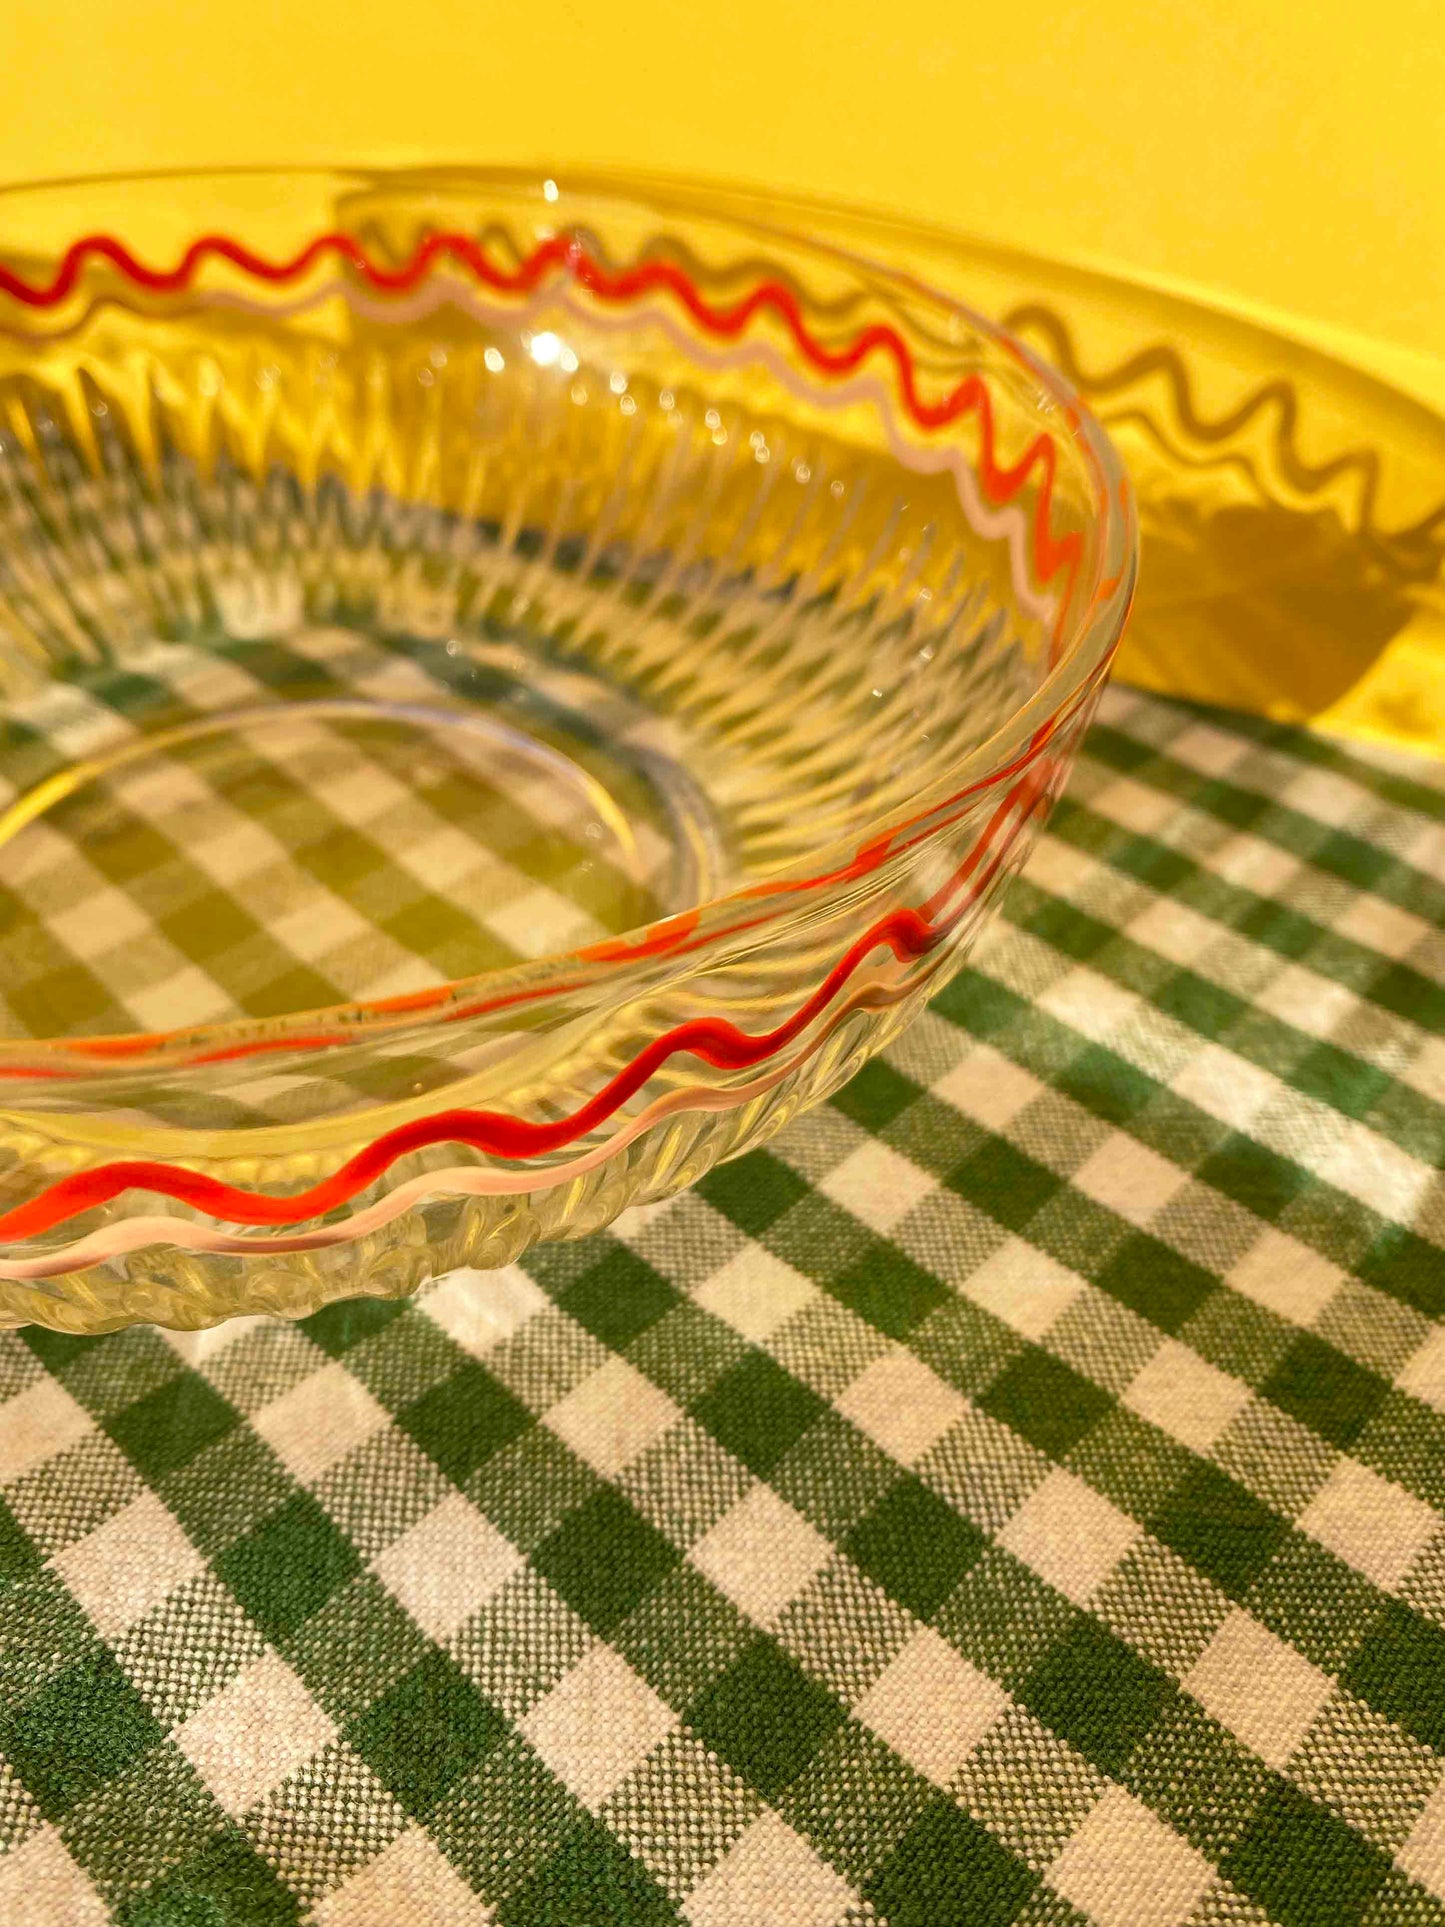 Pink & red wiggle ribbed small bowl